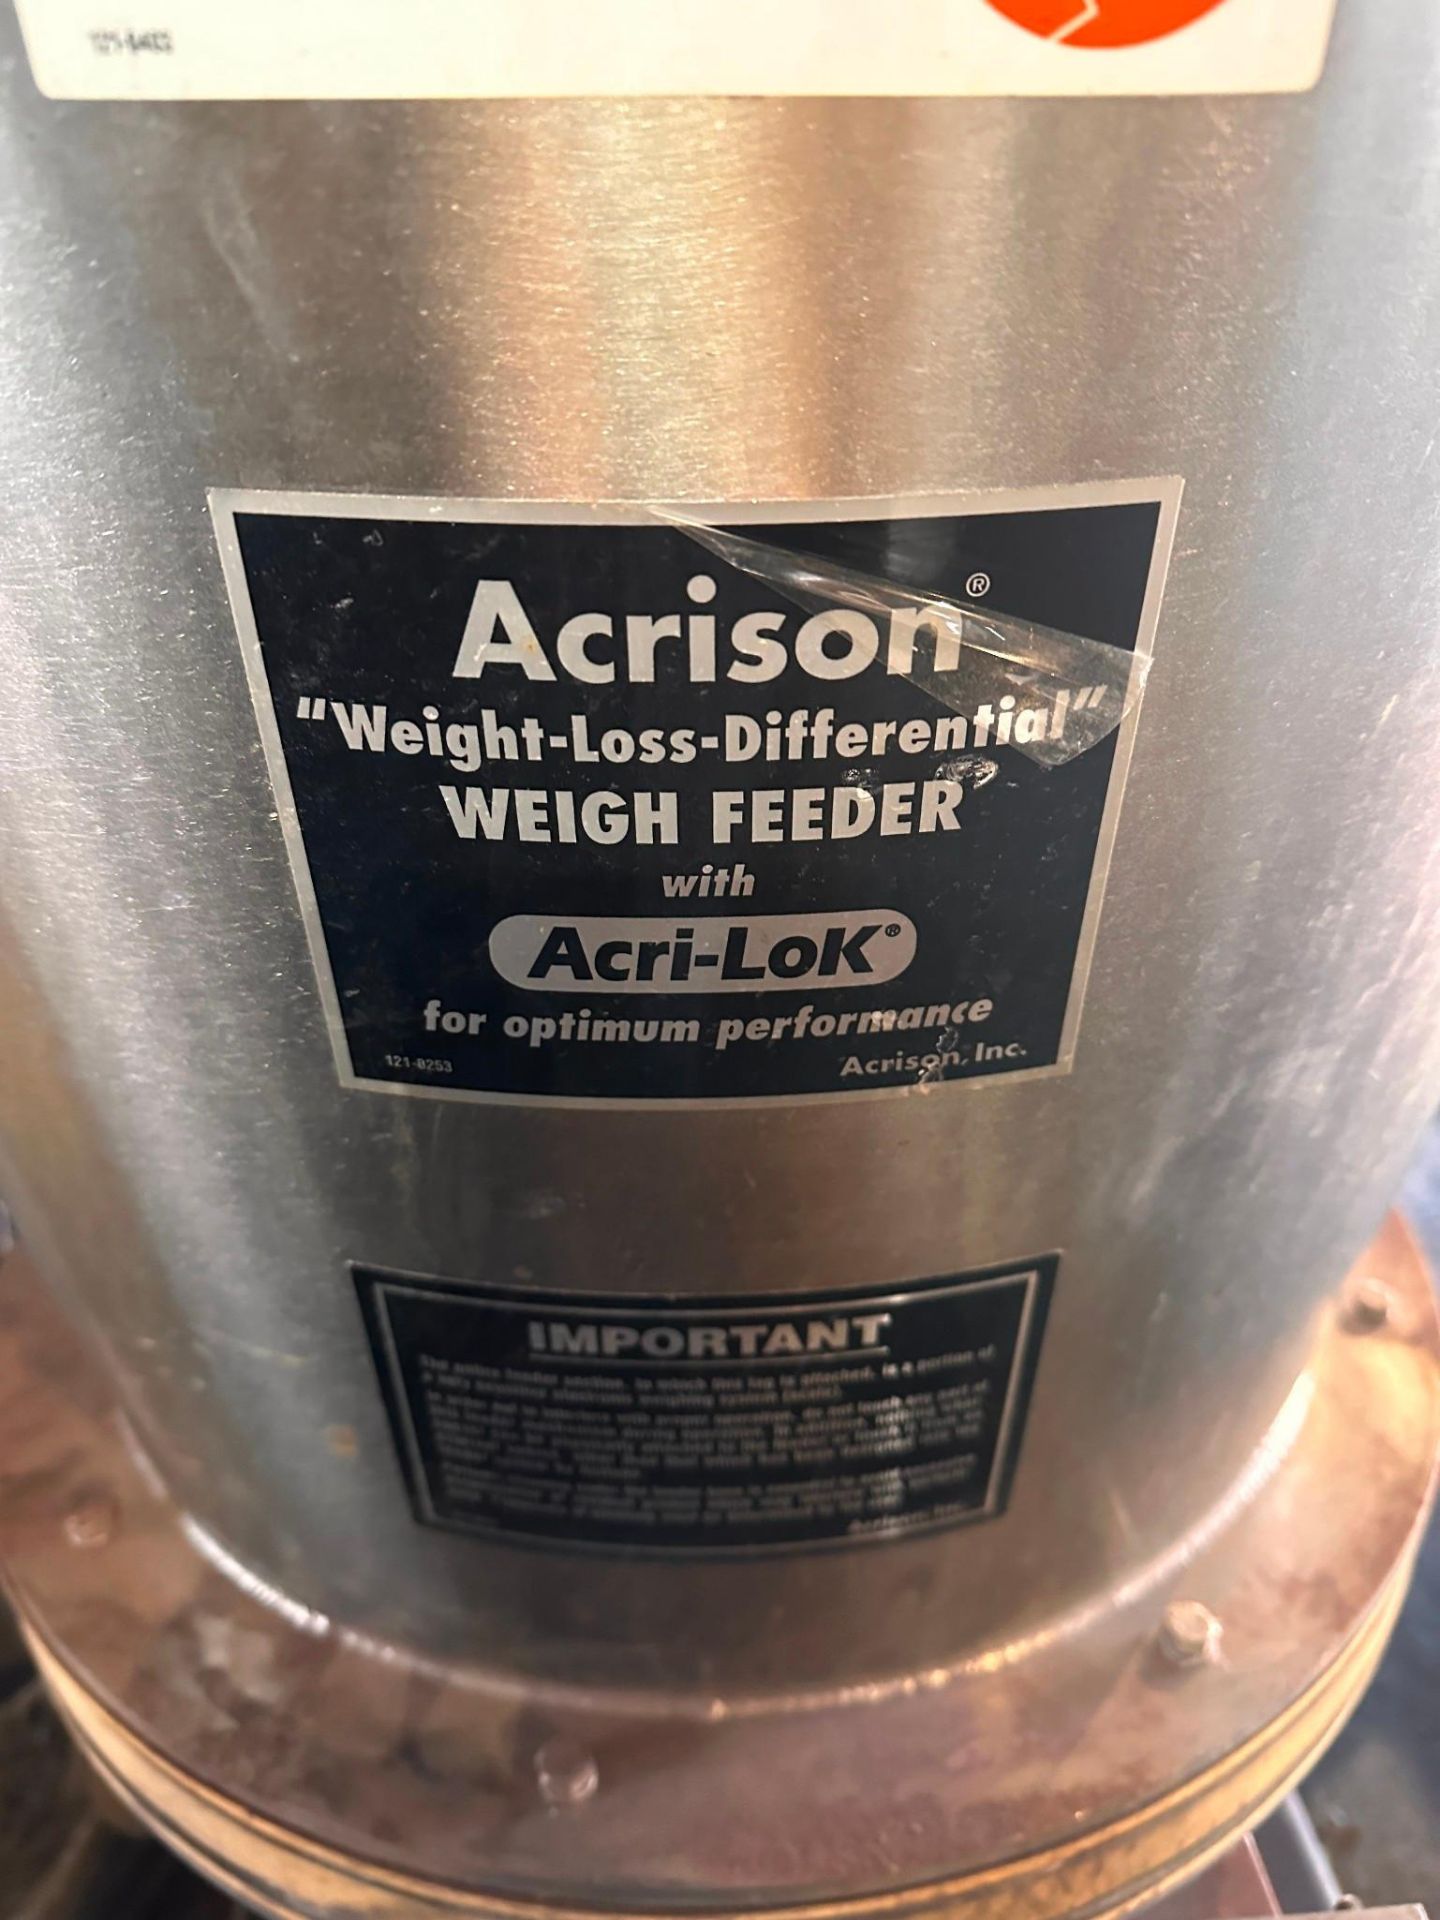 ACRISON WEIGHT-LOSS-DIFFERENTIAL WEIGH FEEDER - Image 3 of 9